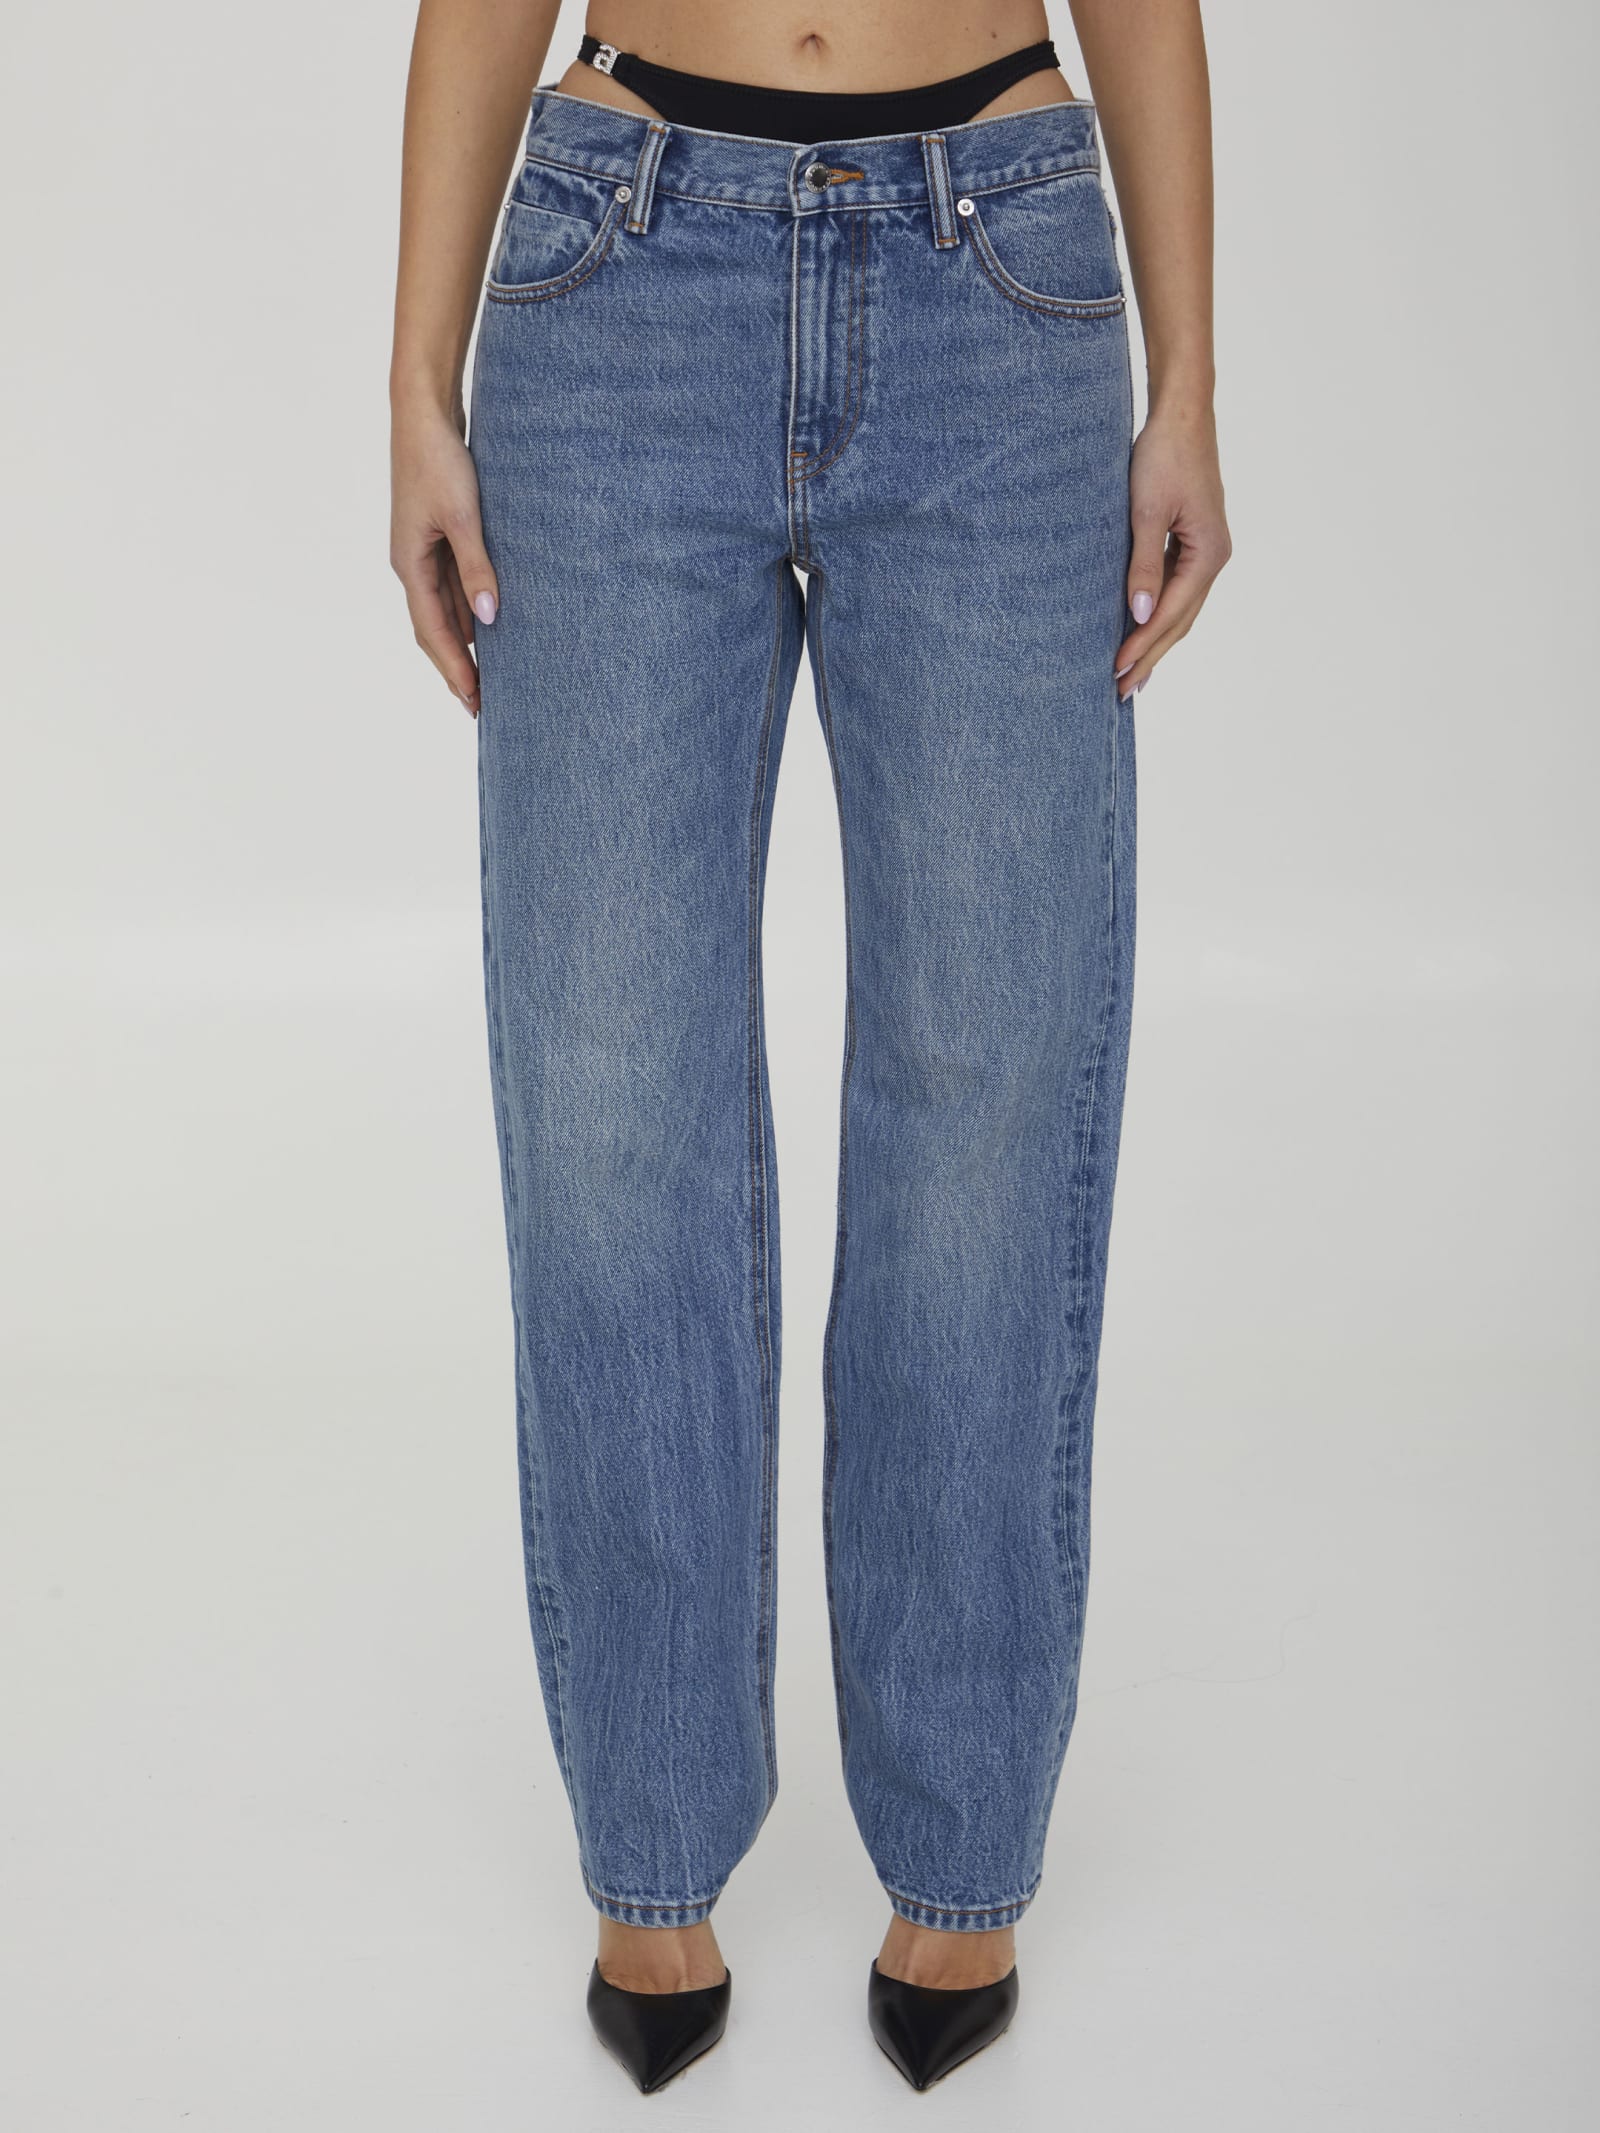 Alexander Wang Jeans With Straps Detailing